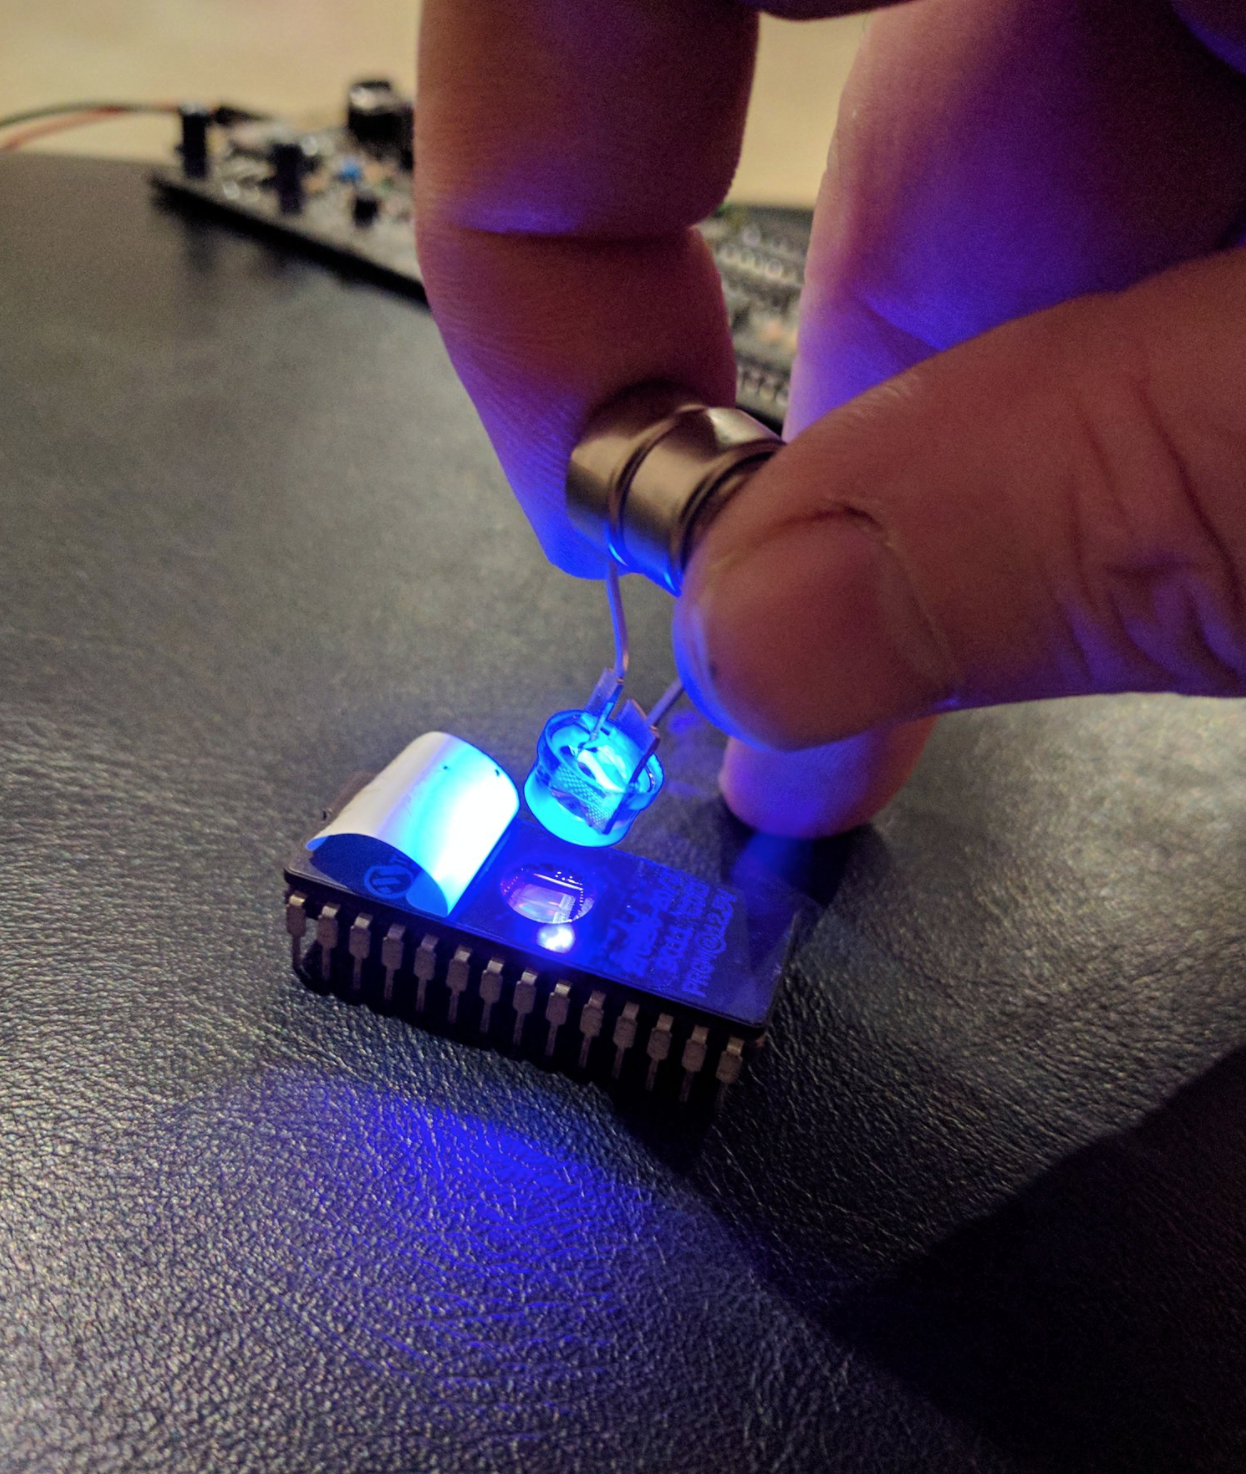 Silly pic of UV LED trying to erase EPROM